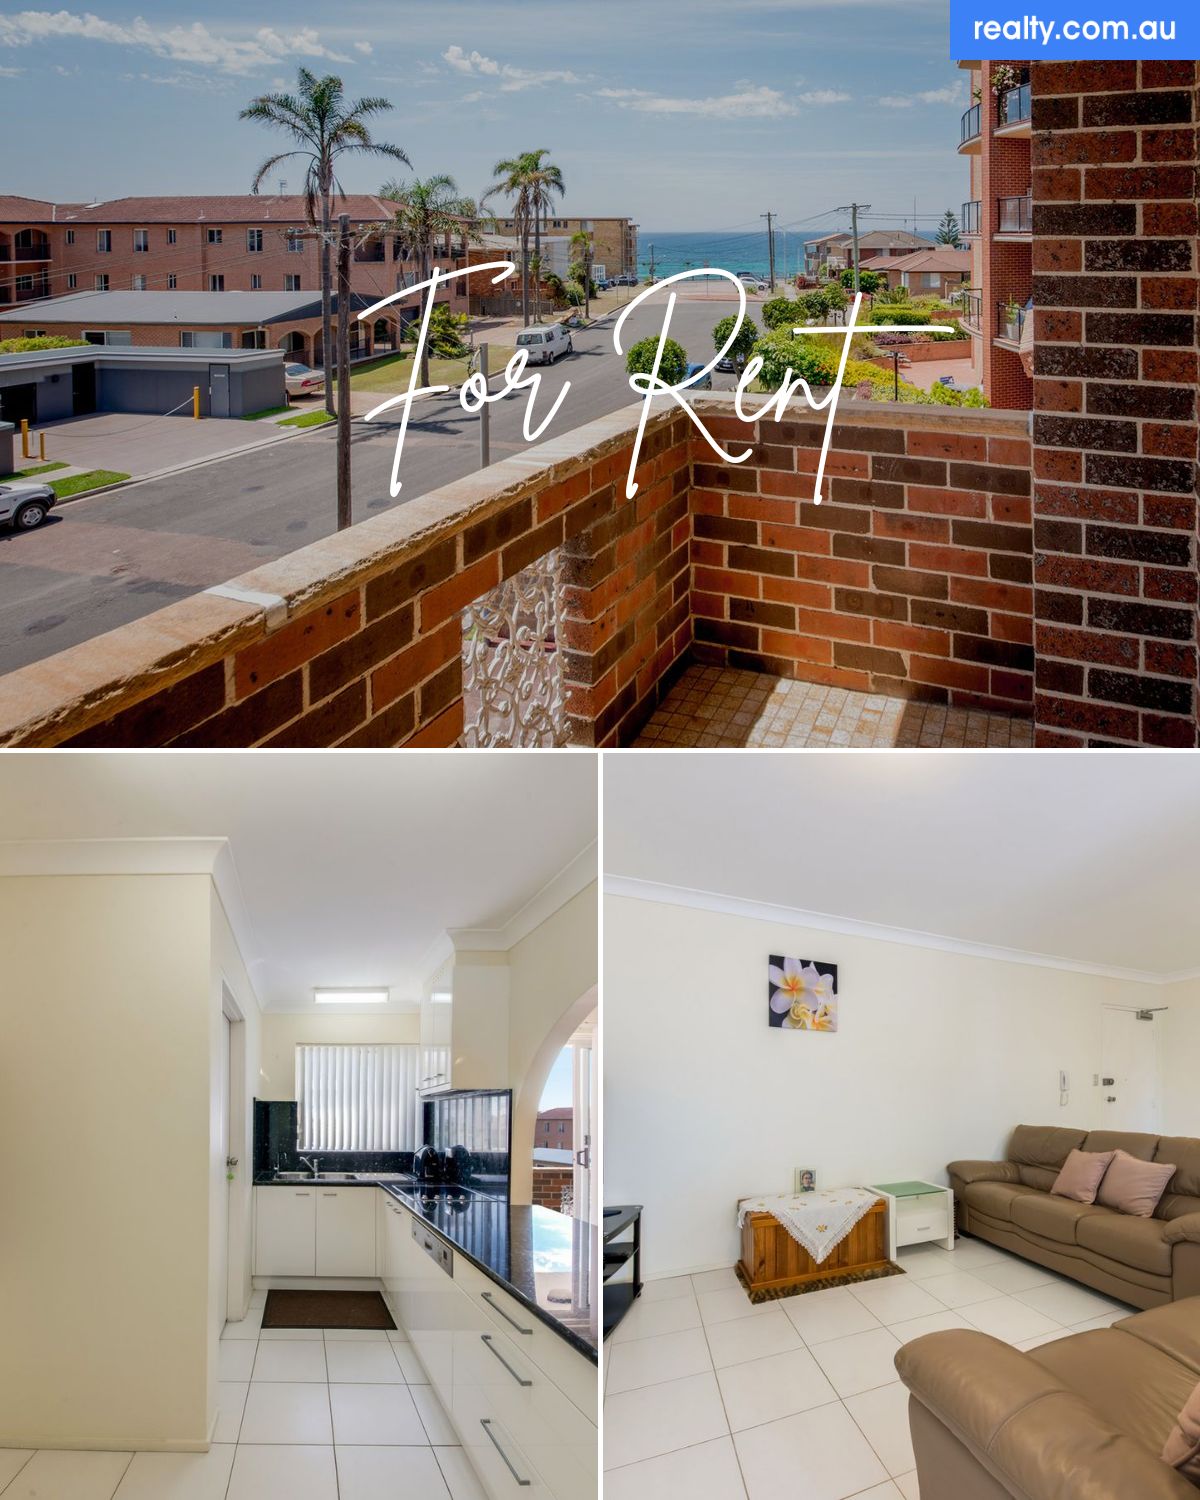 7/61-63 Ocean Pde, The Entrance, NSW 2261 | Realty.com.au